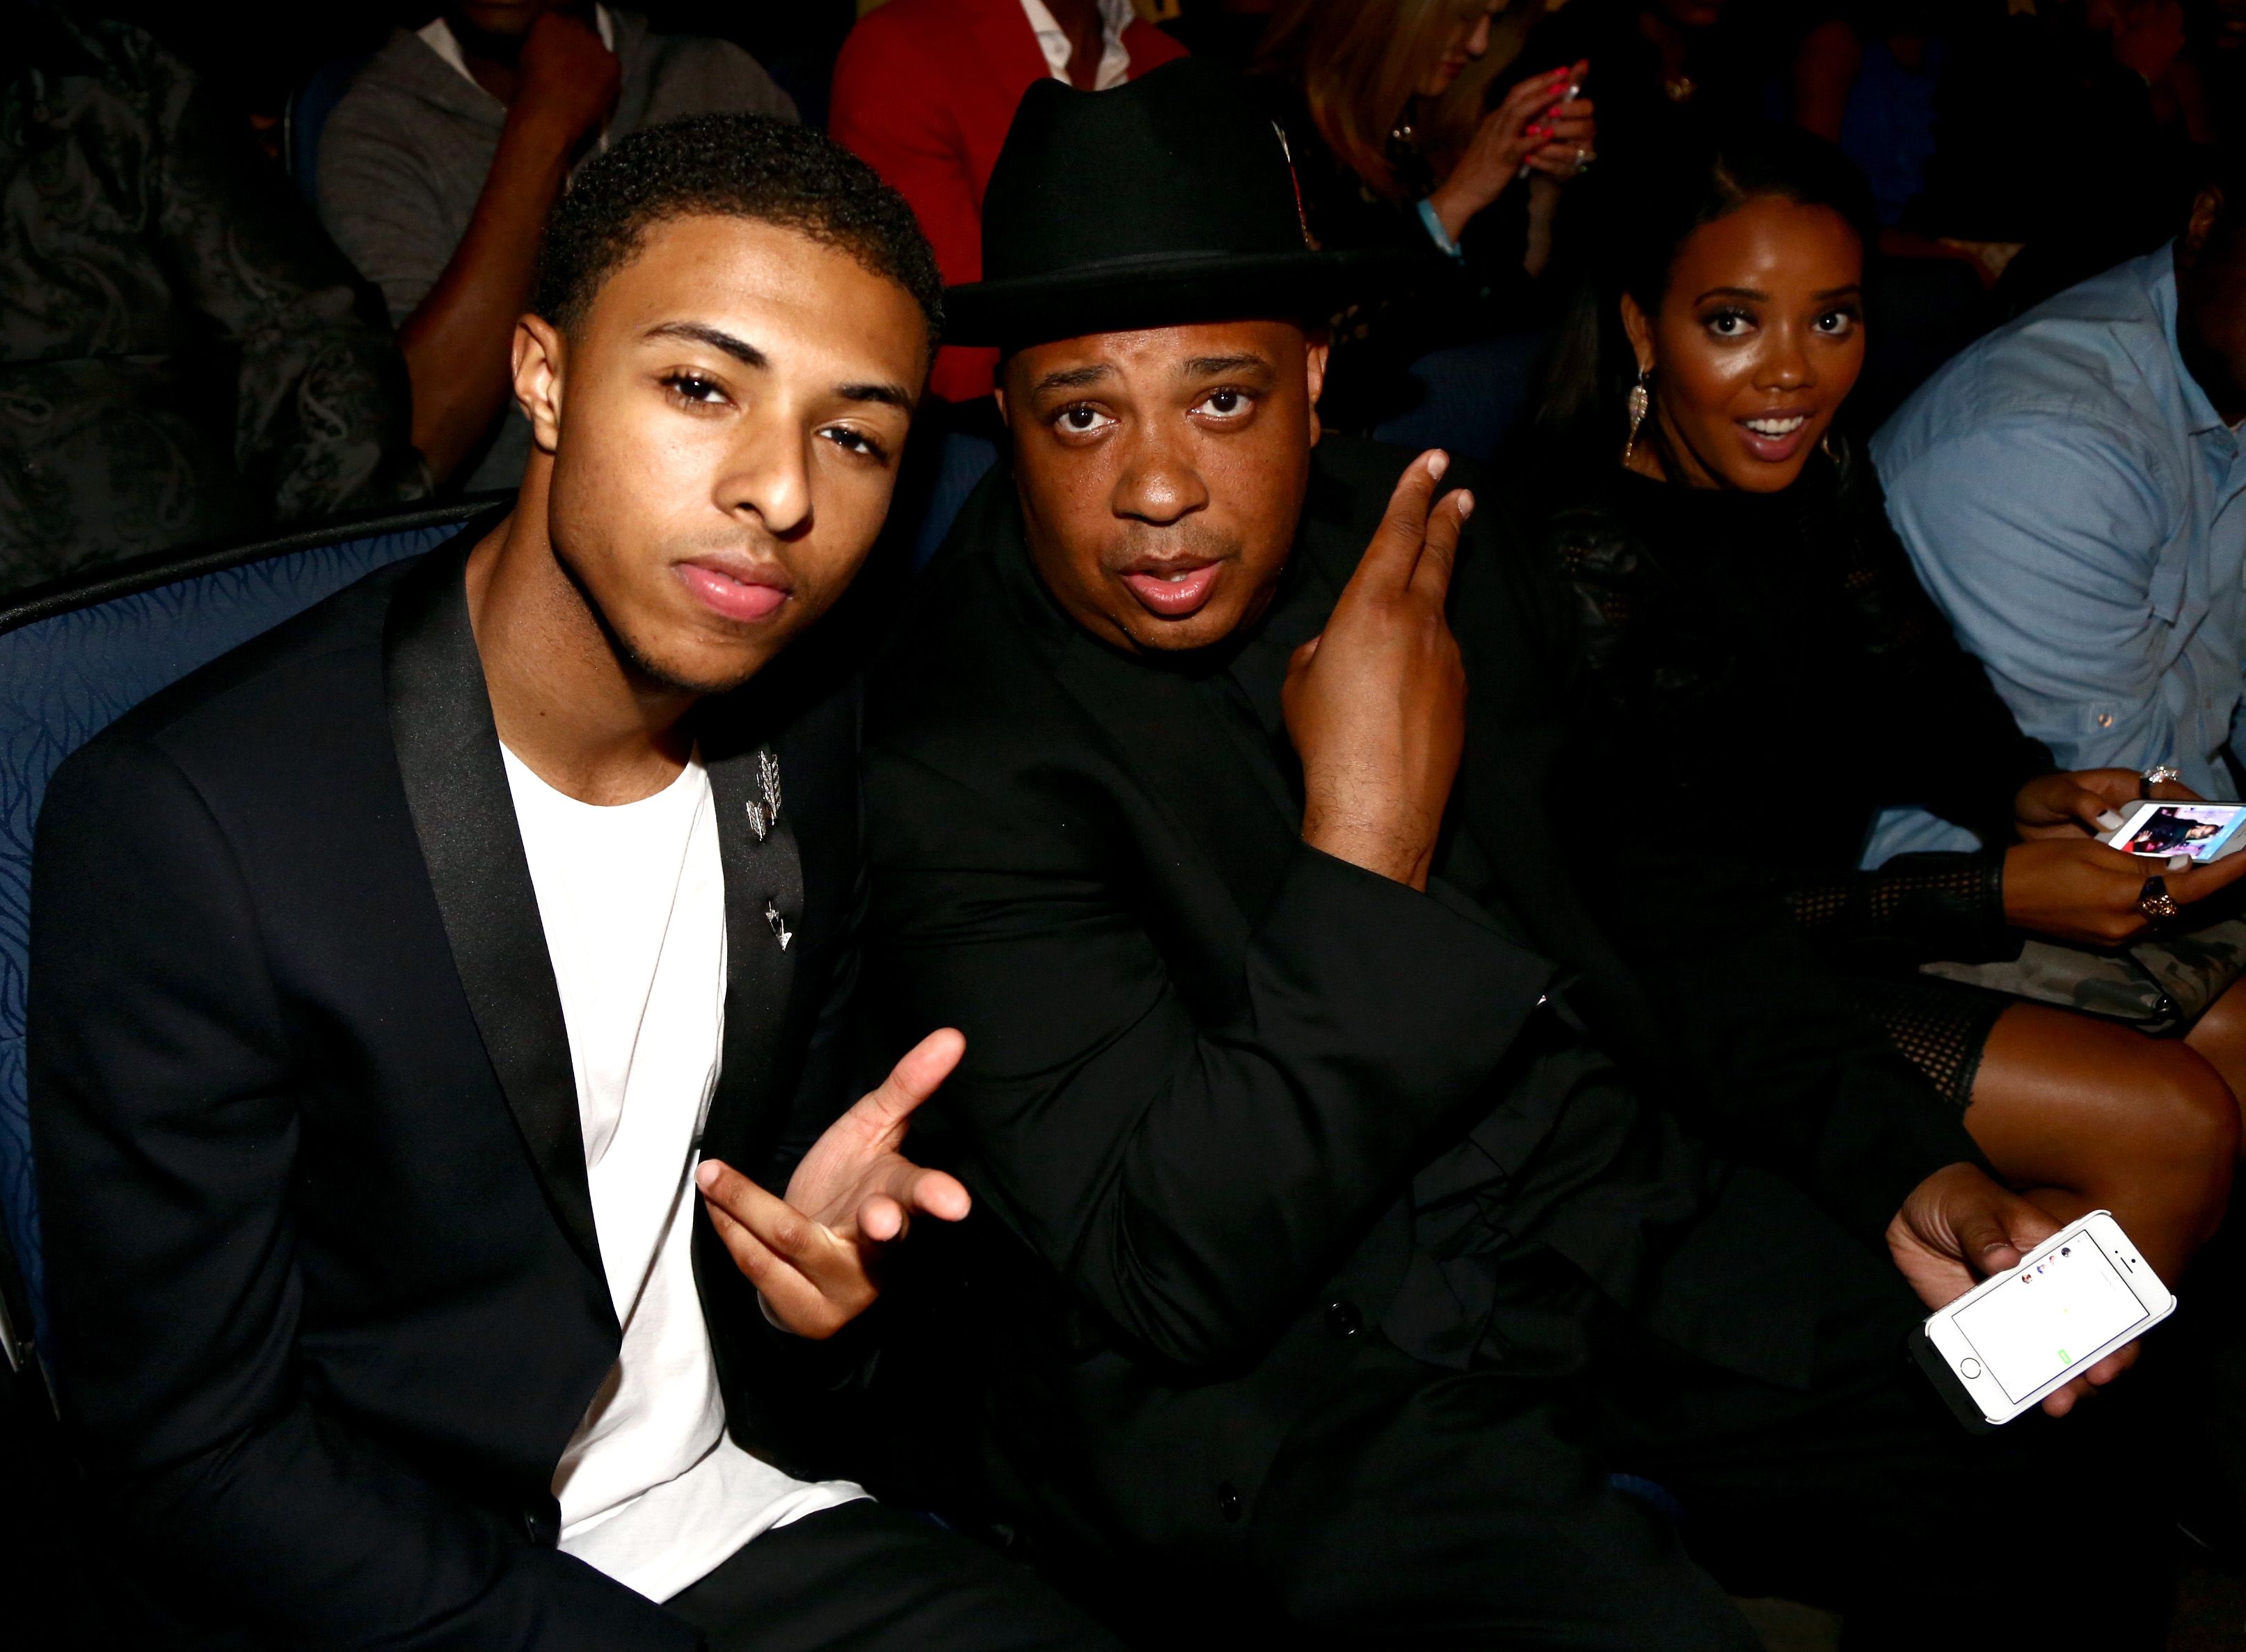 Diggy Simmons and Rev Run at the BET Awards in 2014 in Los Angeles | Source: Getty Images